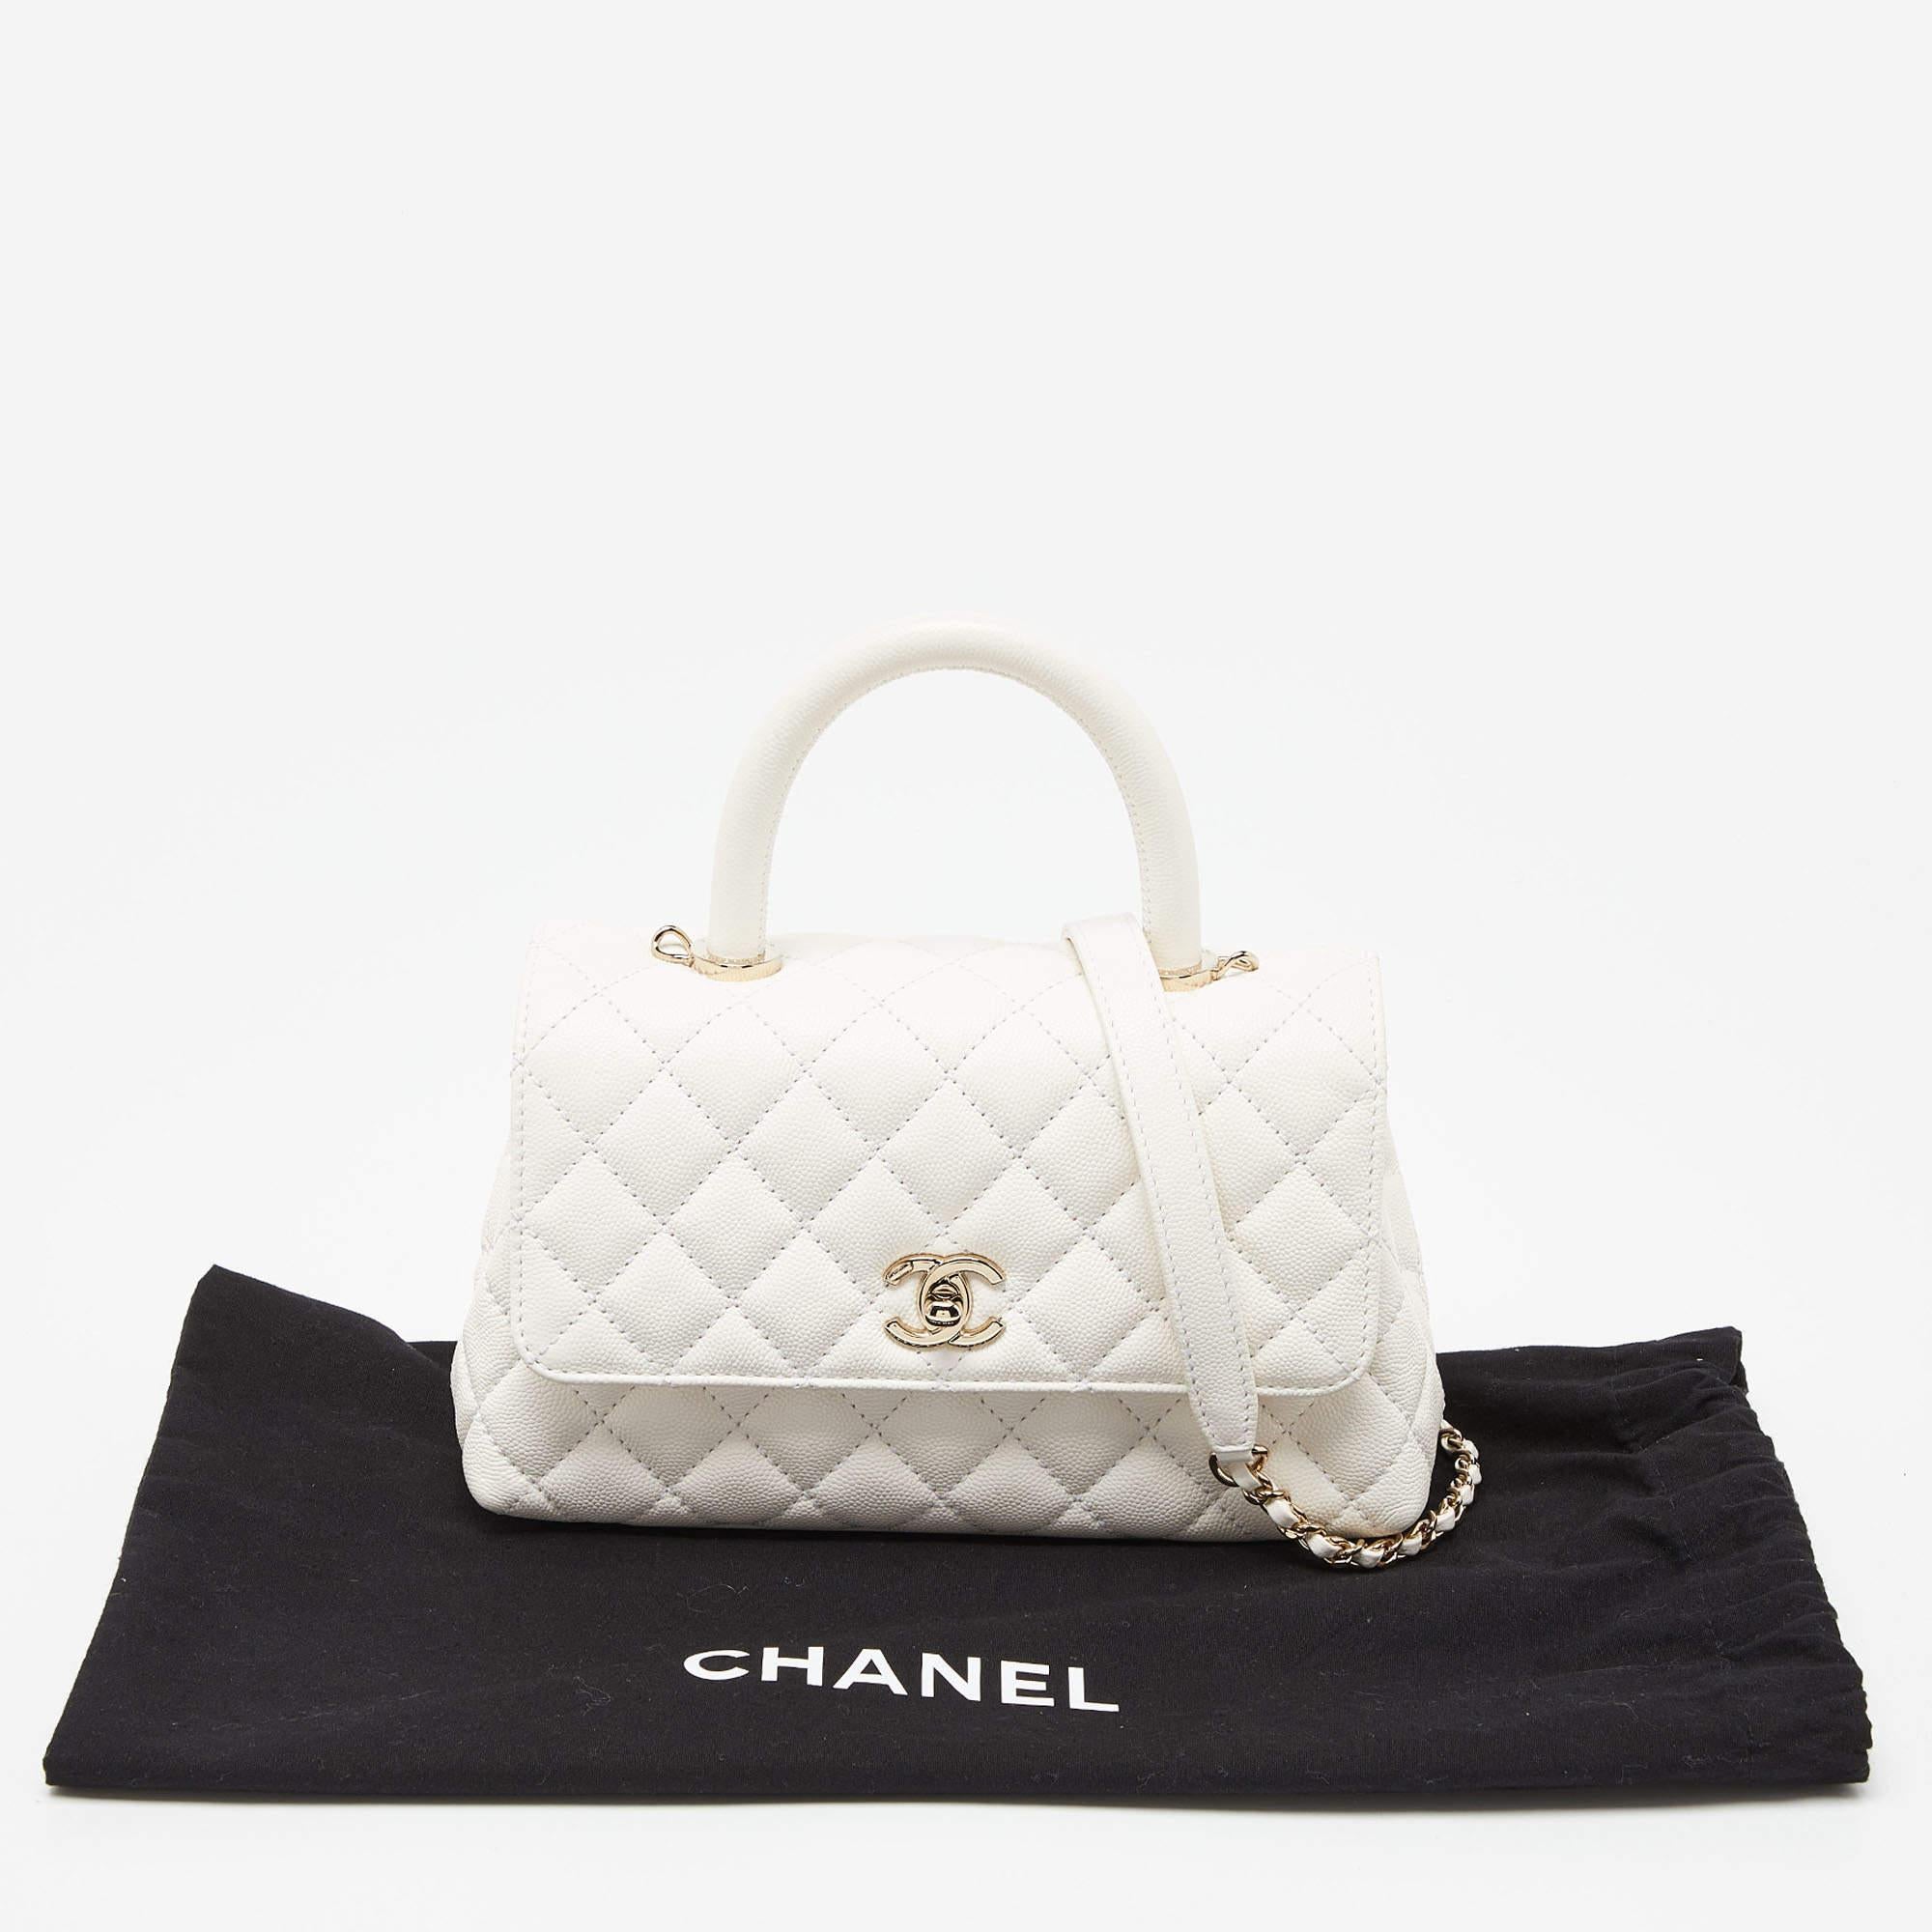 Chanel White Quilted Caviar Leather Small Coco Top Handle Bag 3